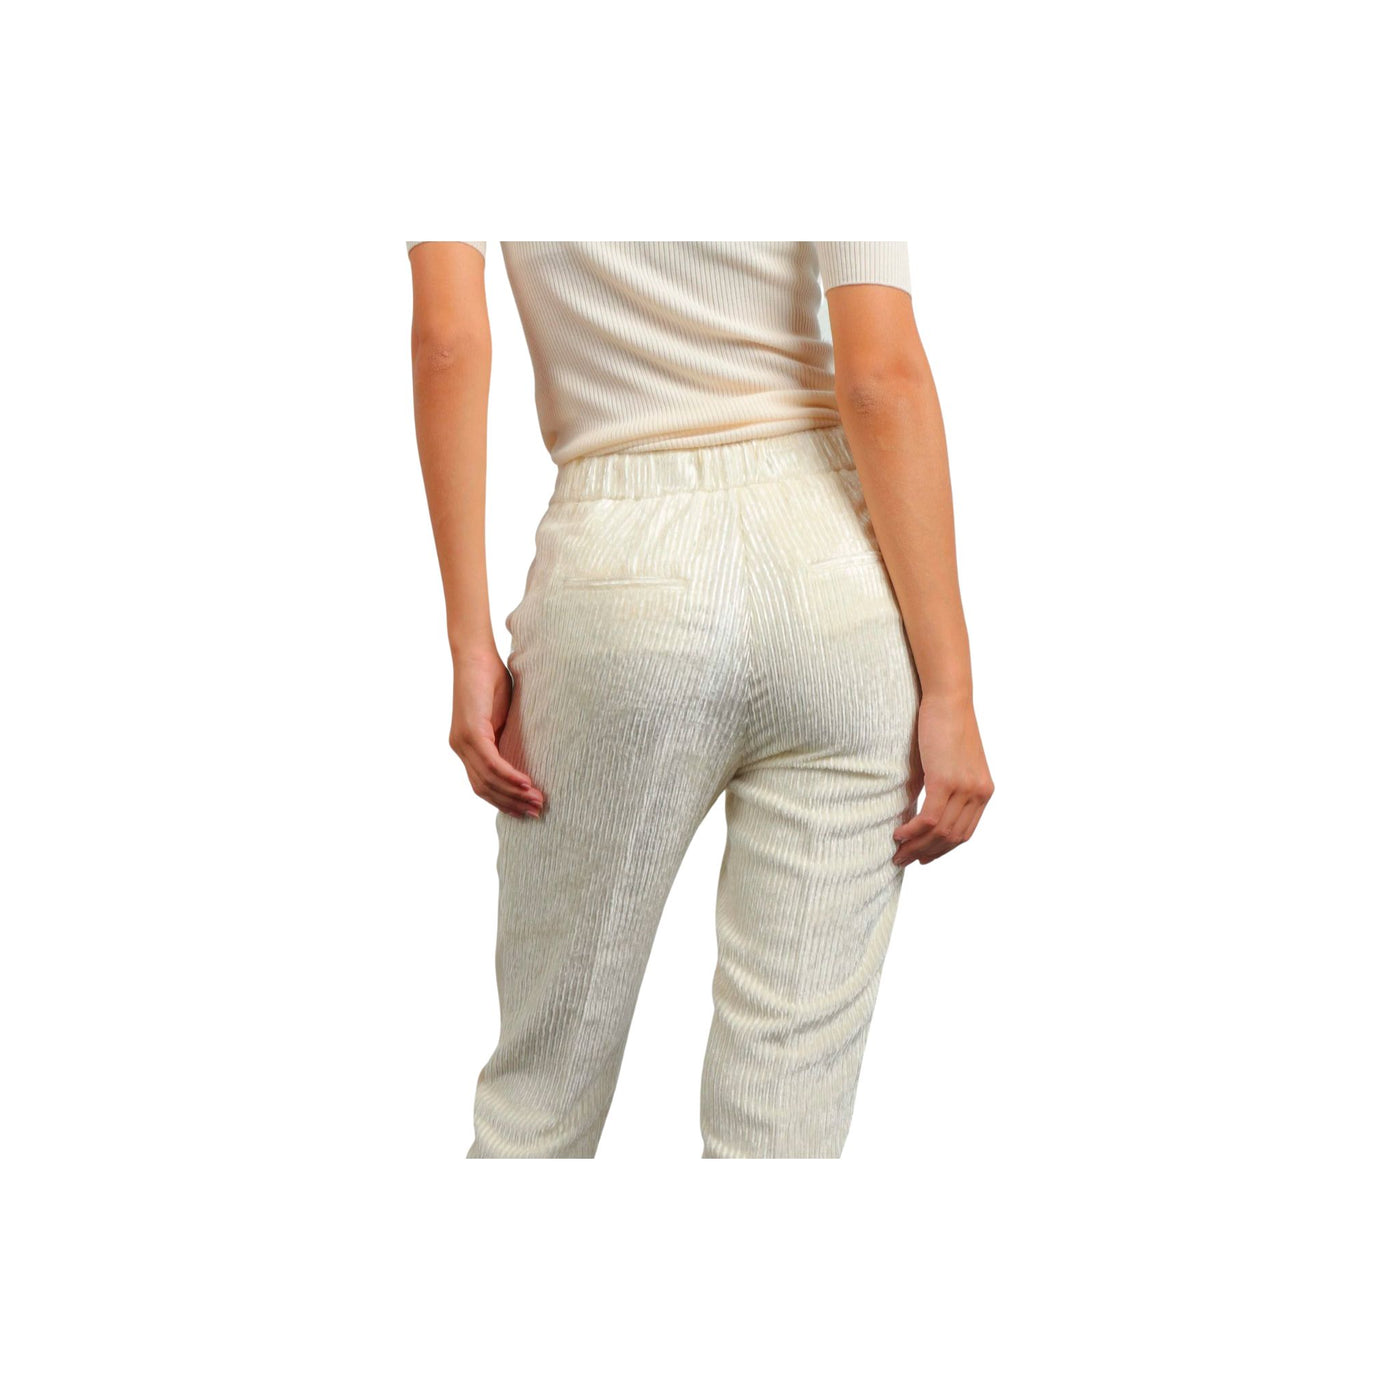 Pantalone Donna in velluto con coulisse